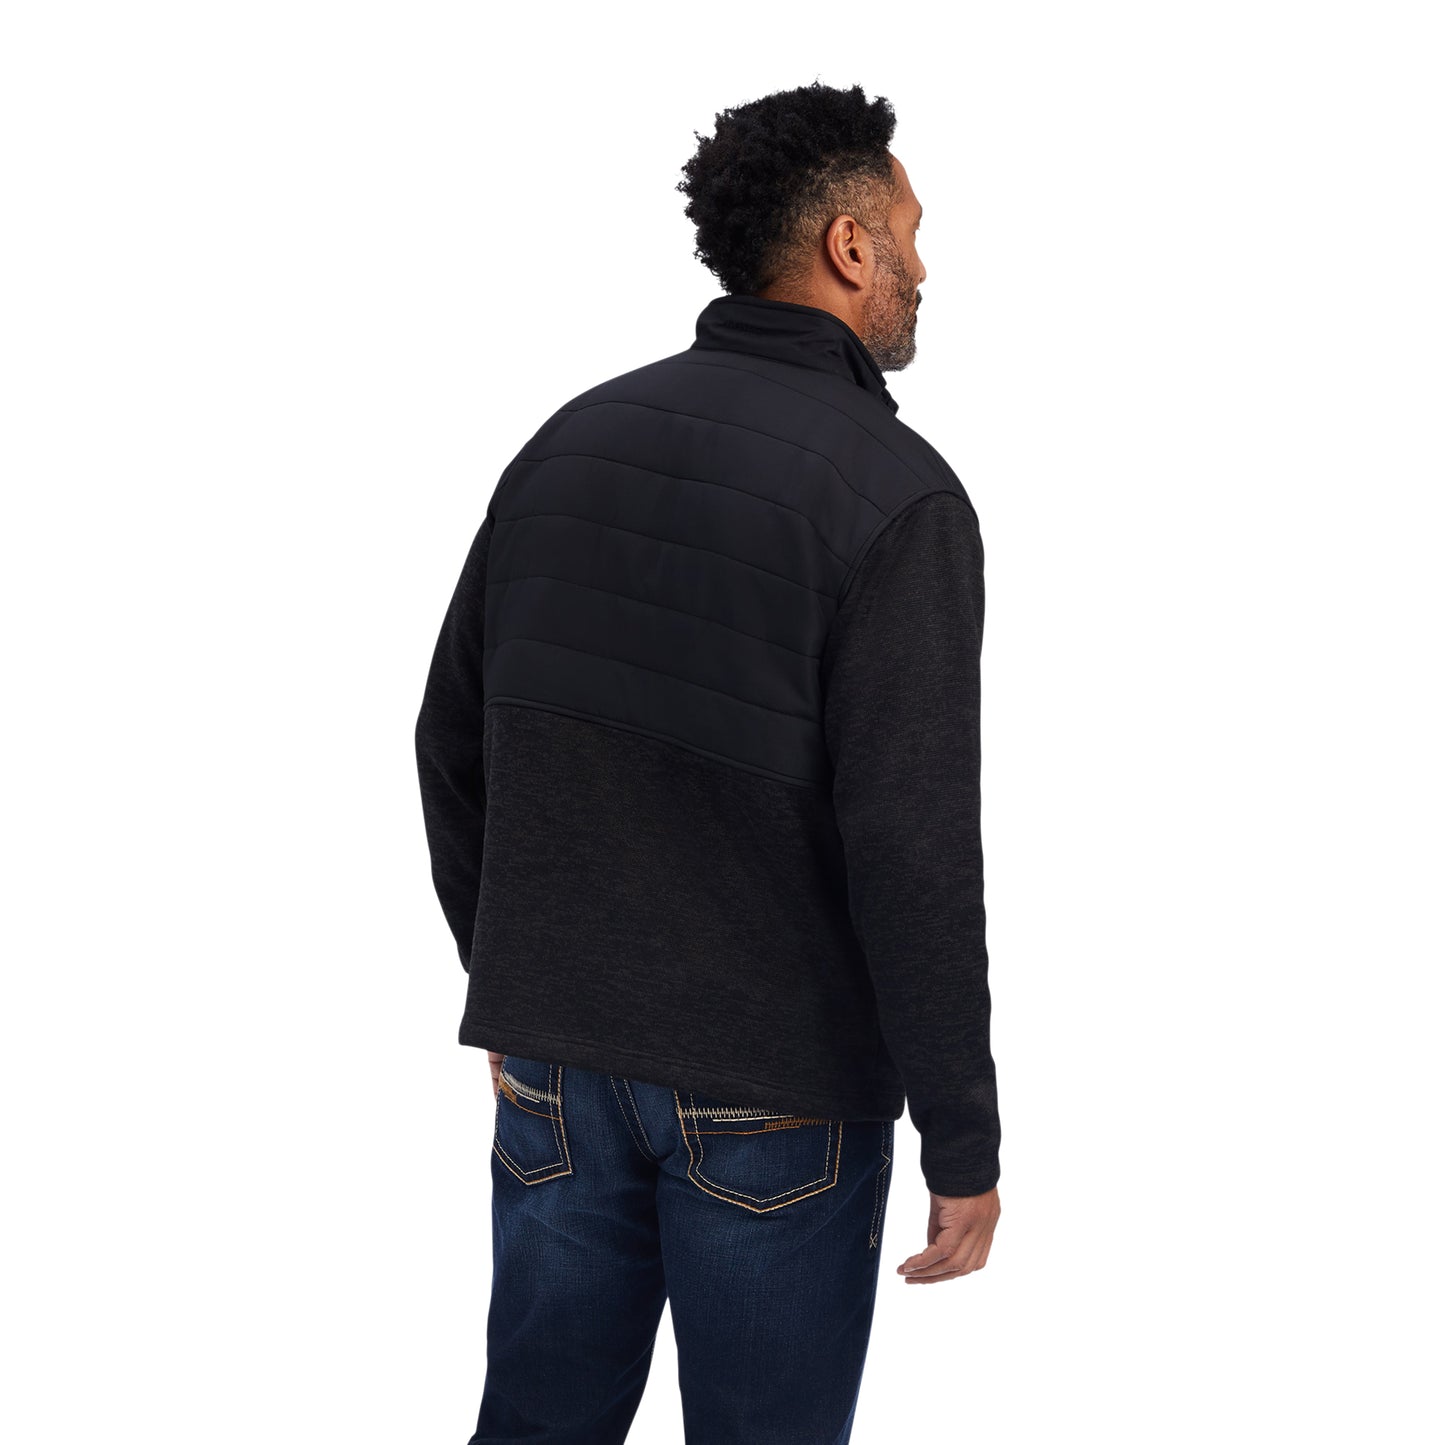 10041736 Ariat Caldwell Reinforced Snap sweater Charcoal